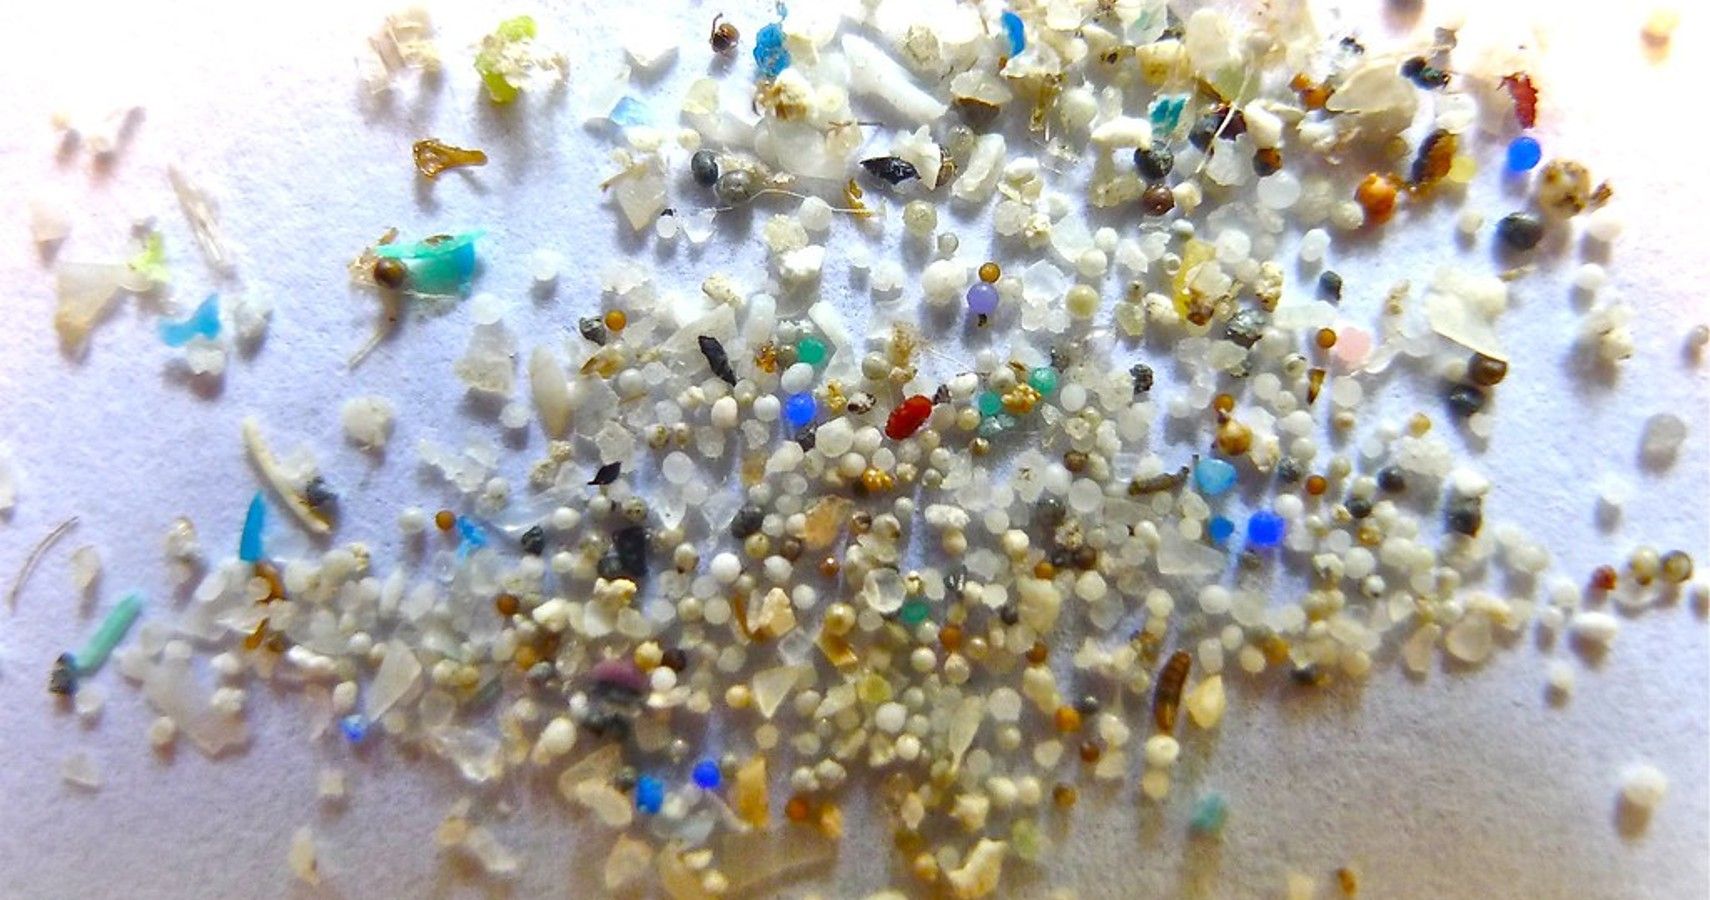 Staggering Amount Of Microplastic Found In Baby Poop (1)